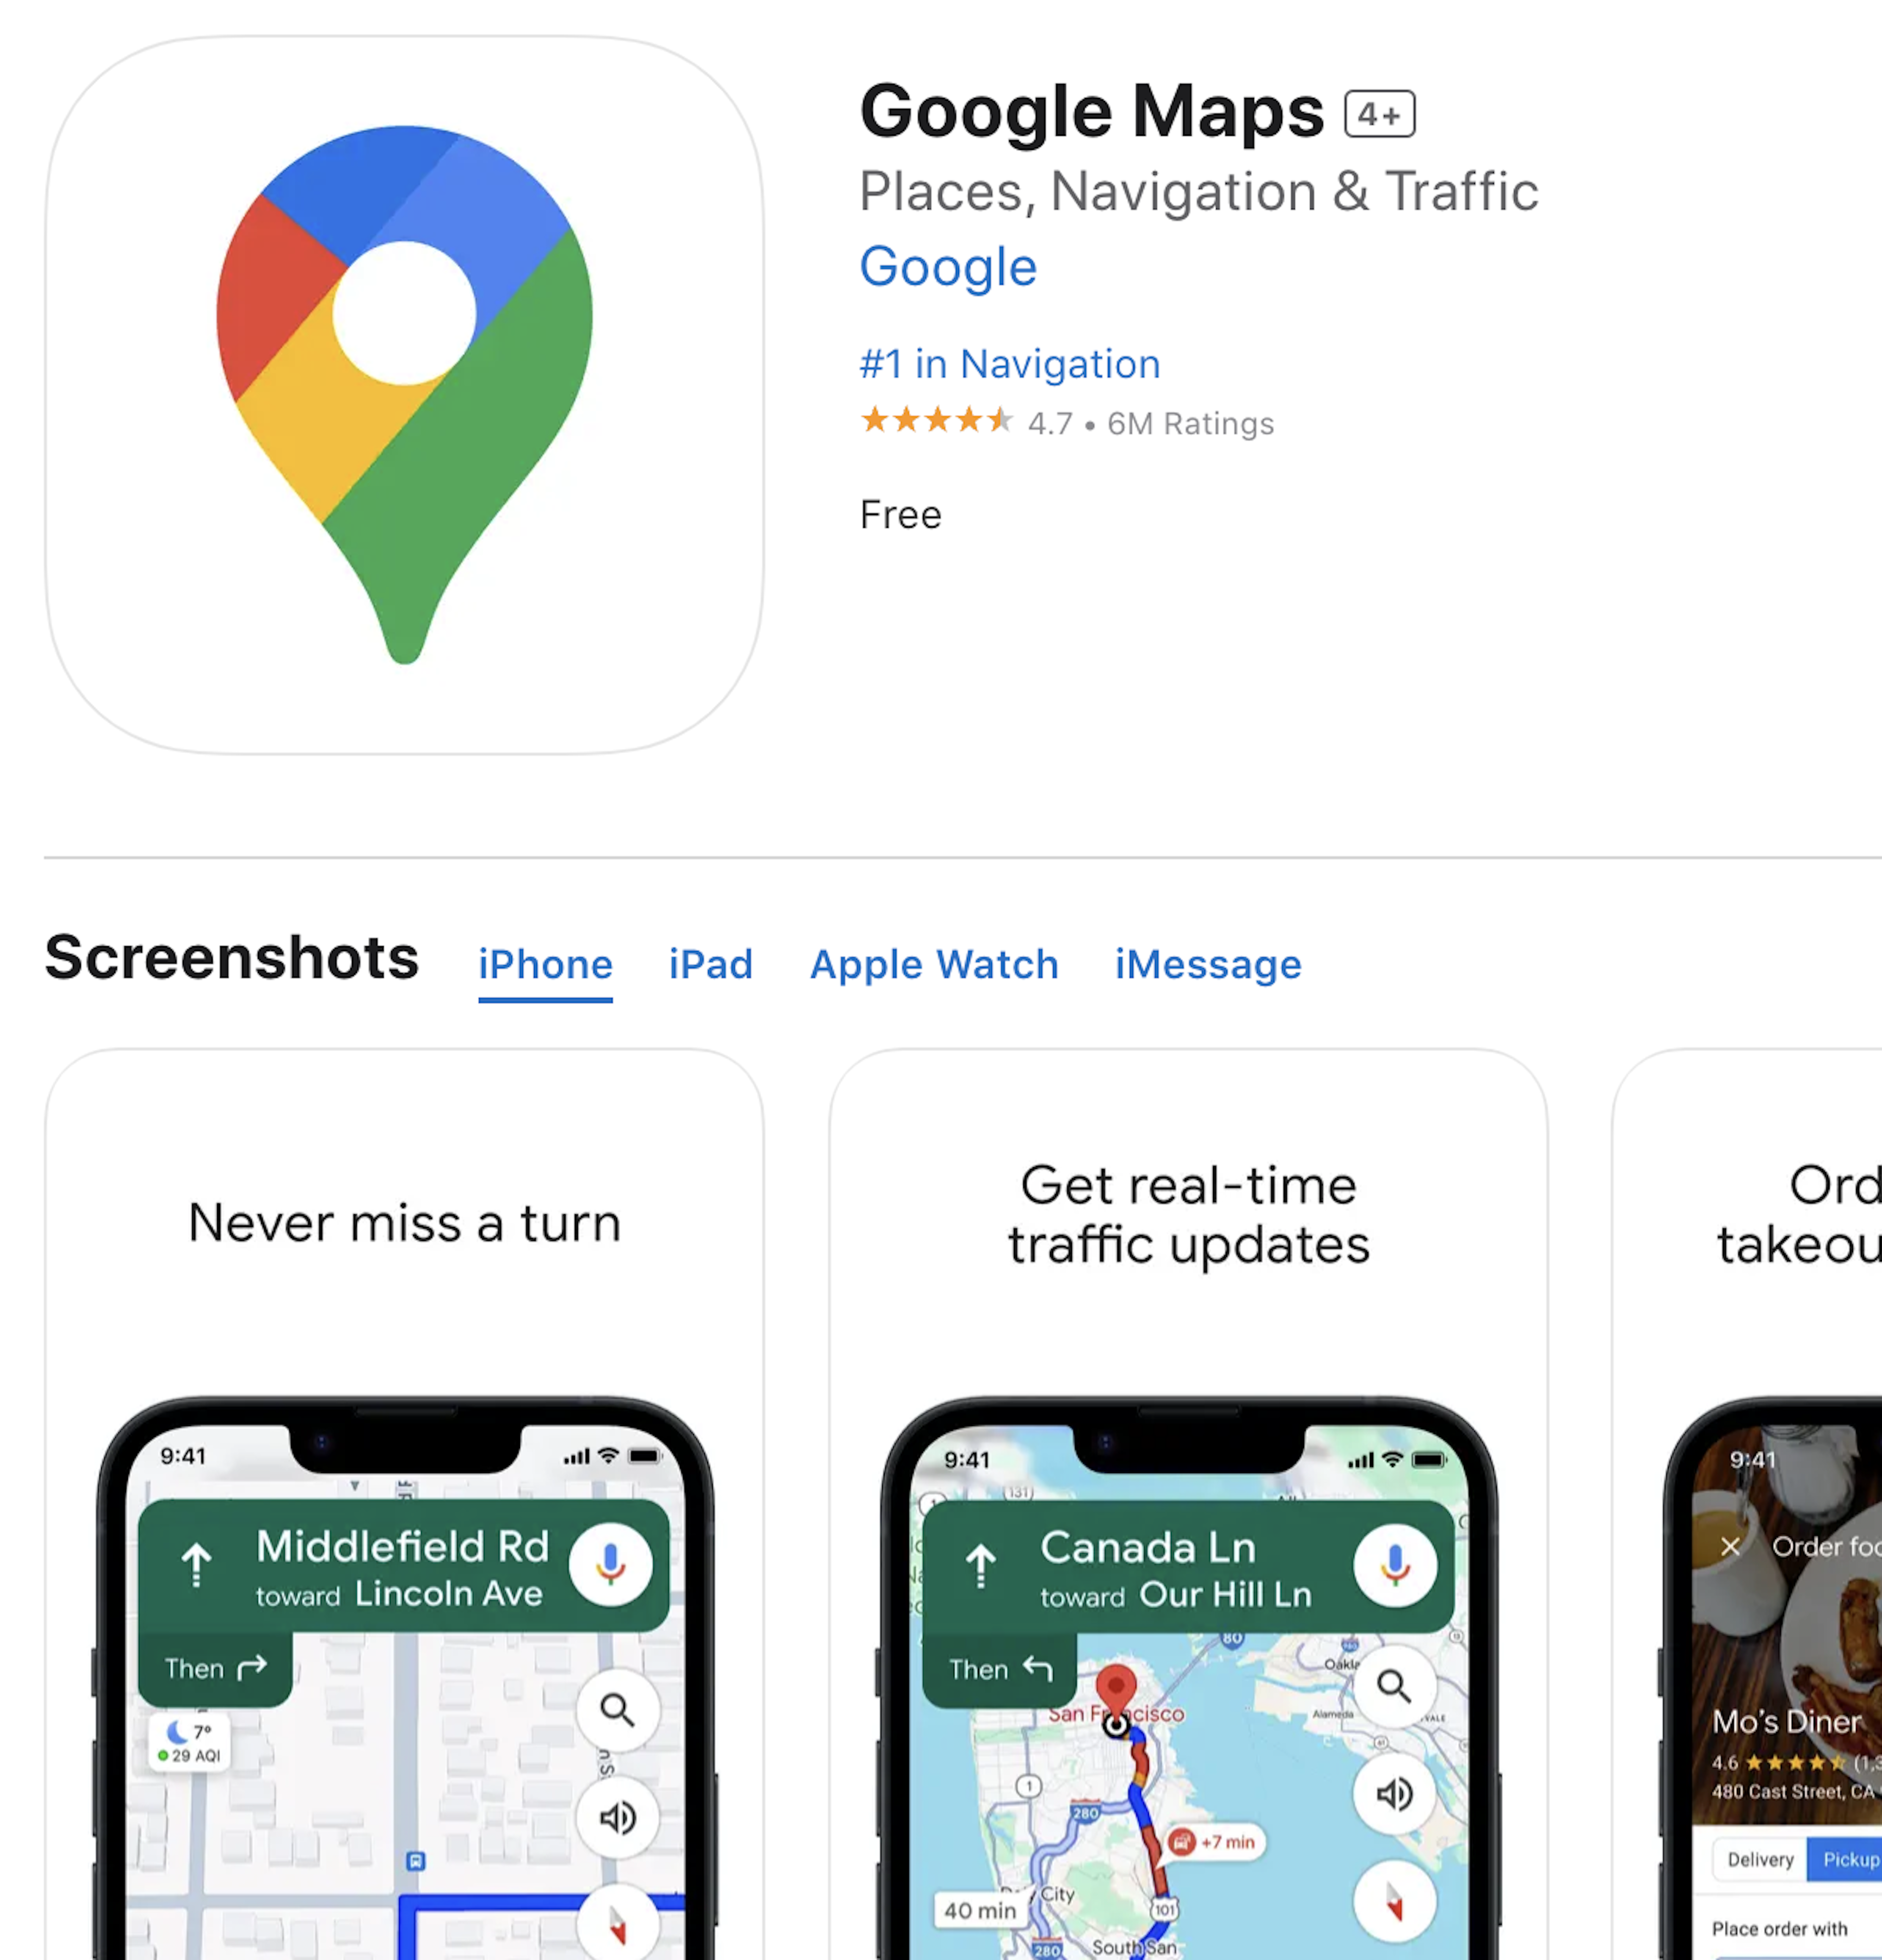 1. Download and open the Google Maps app on your phone